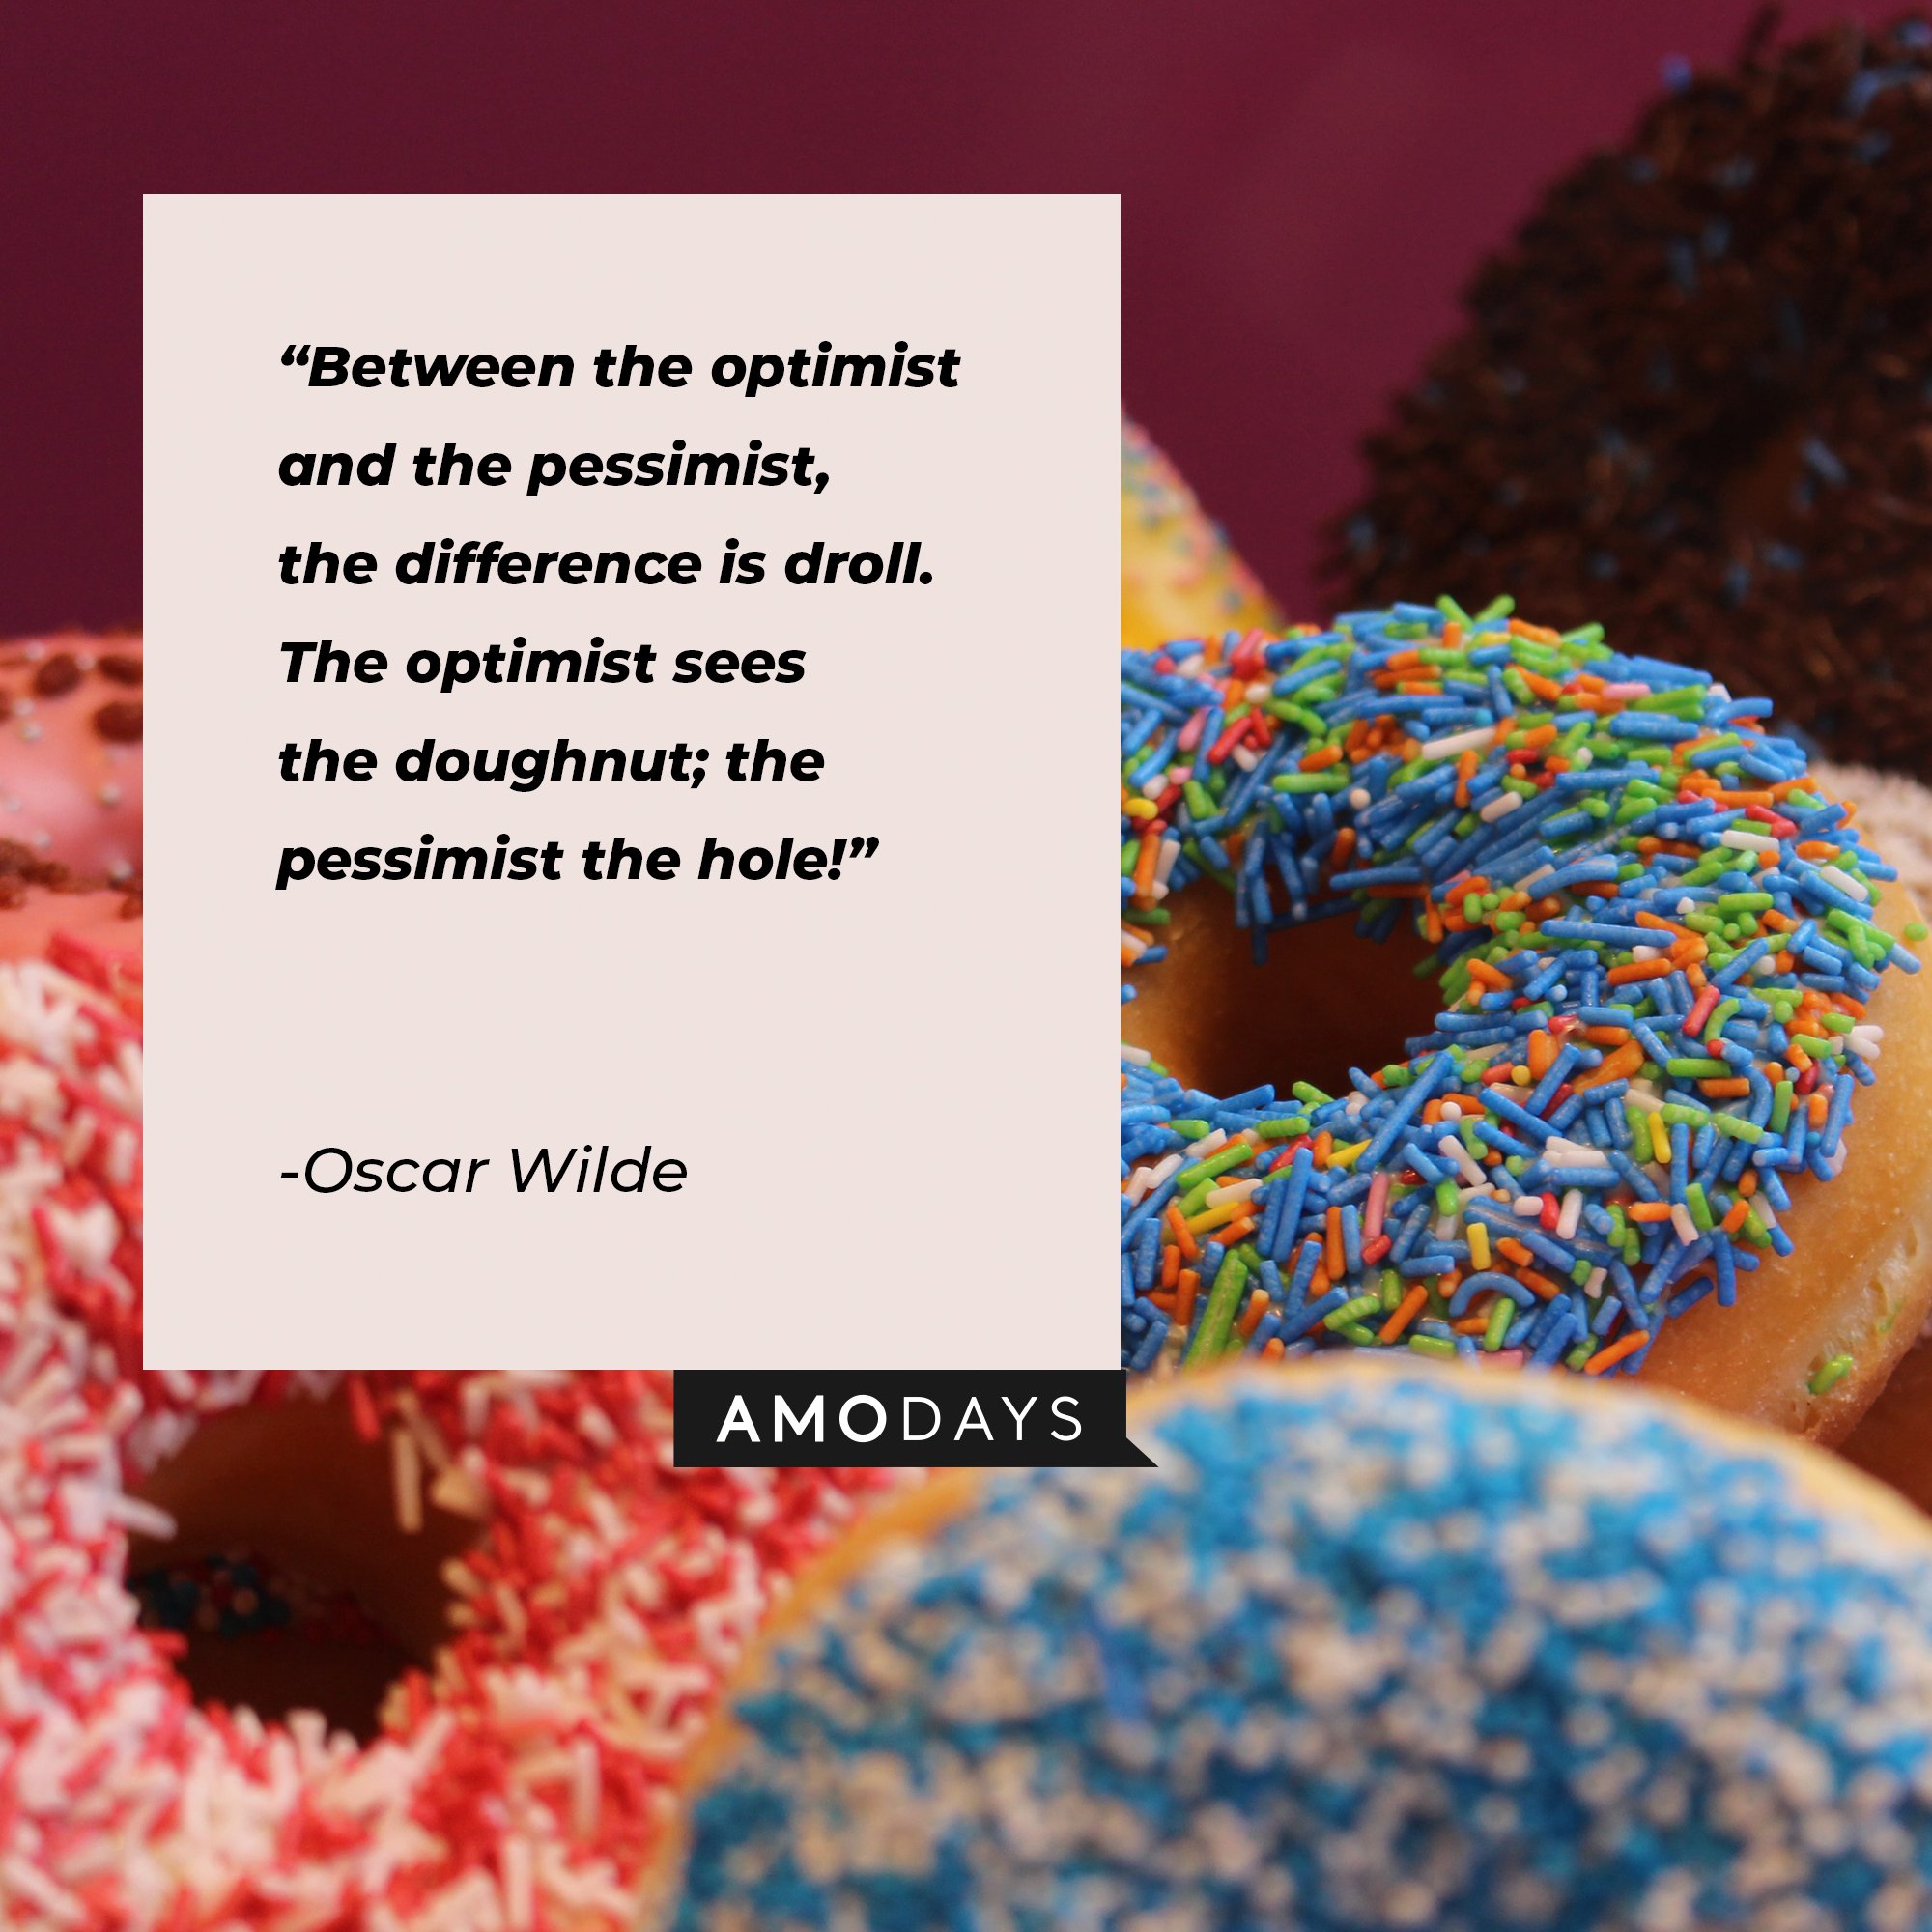 Oscar Wilde's quote: "Between the optimist and the pessimist, the difference is droll. The optimist sees the doughnut; the pessimist the hole!" | Image: AmoDays